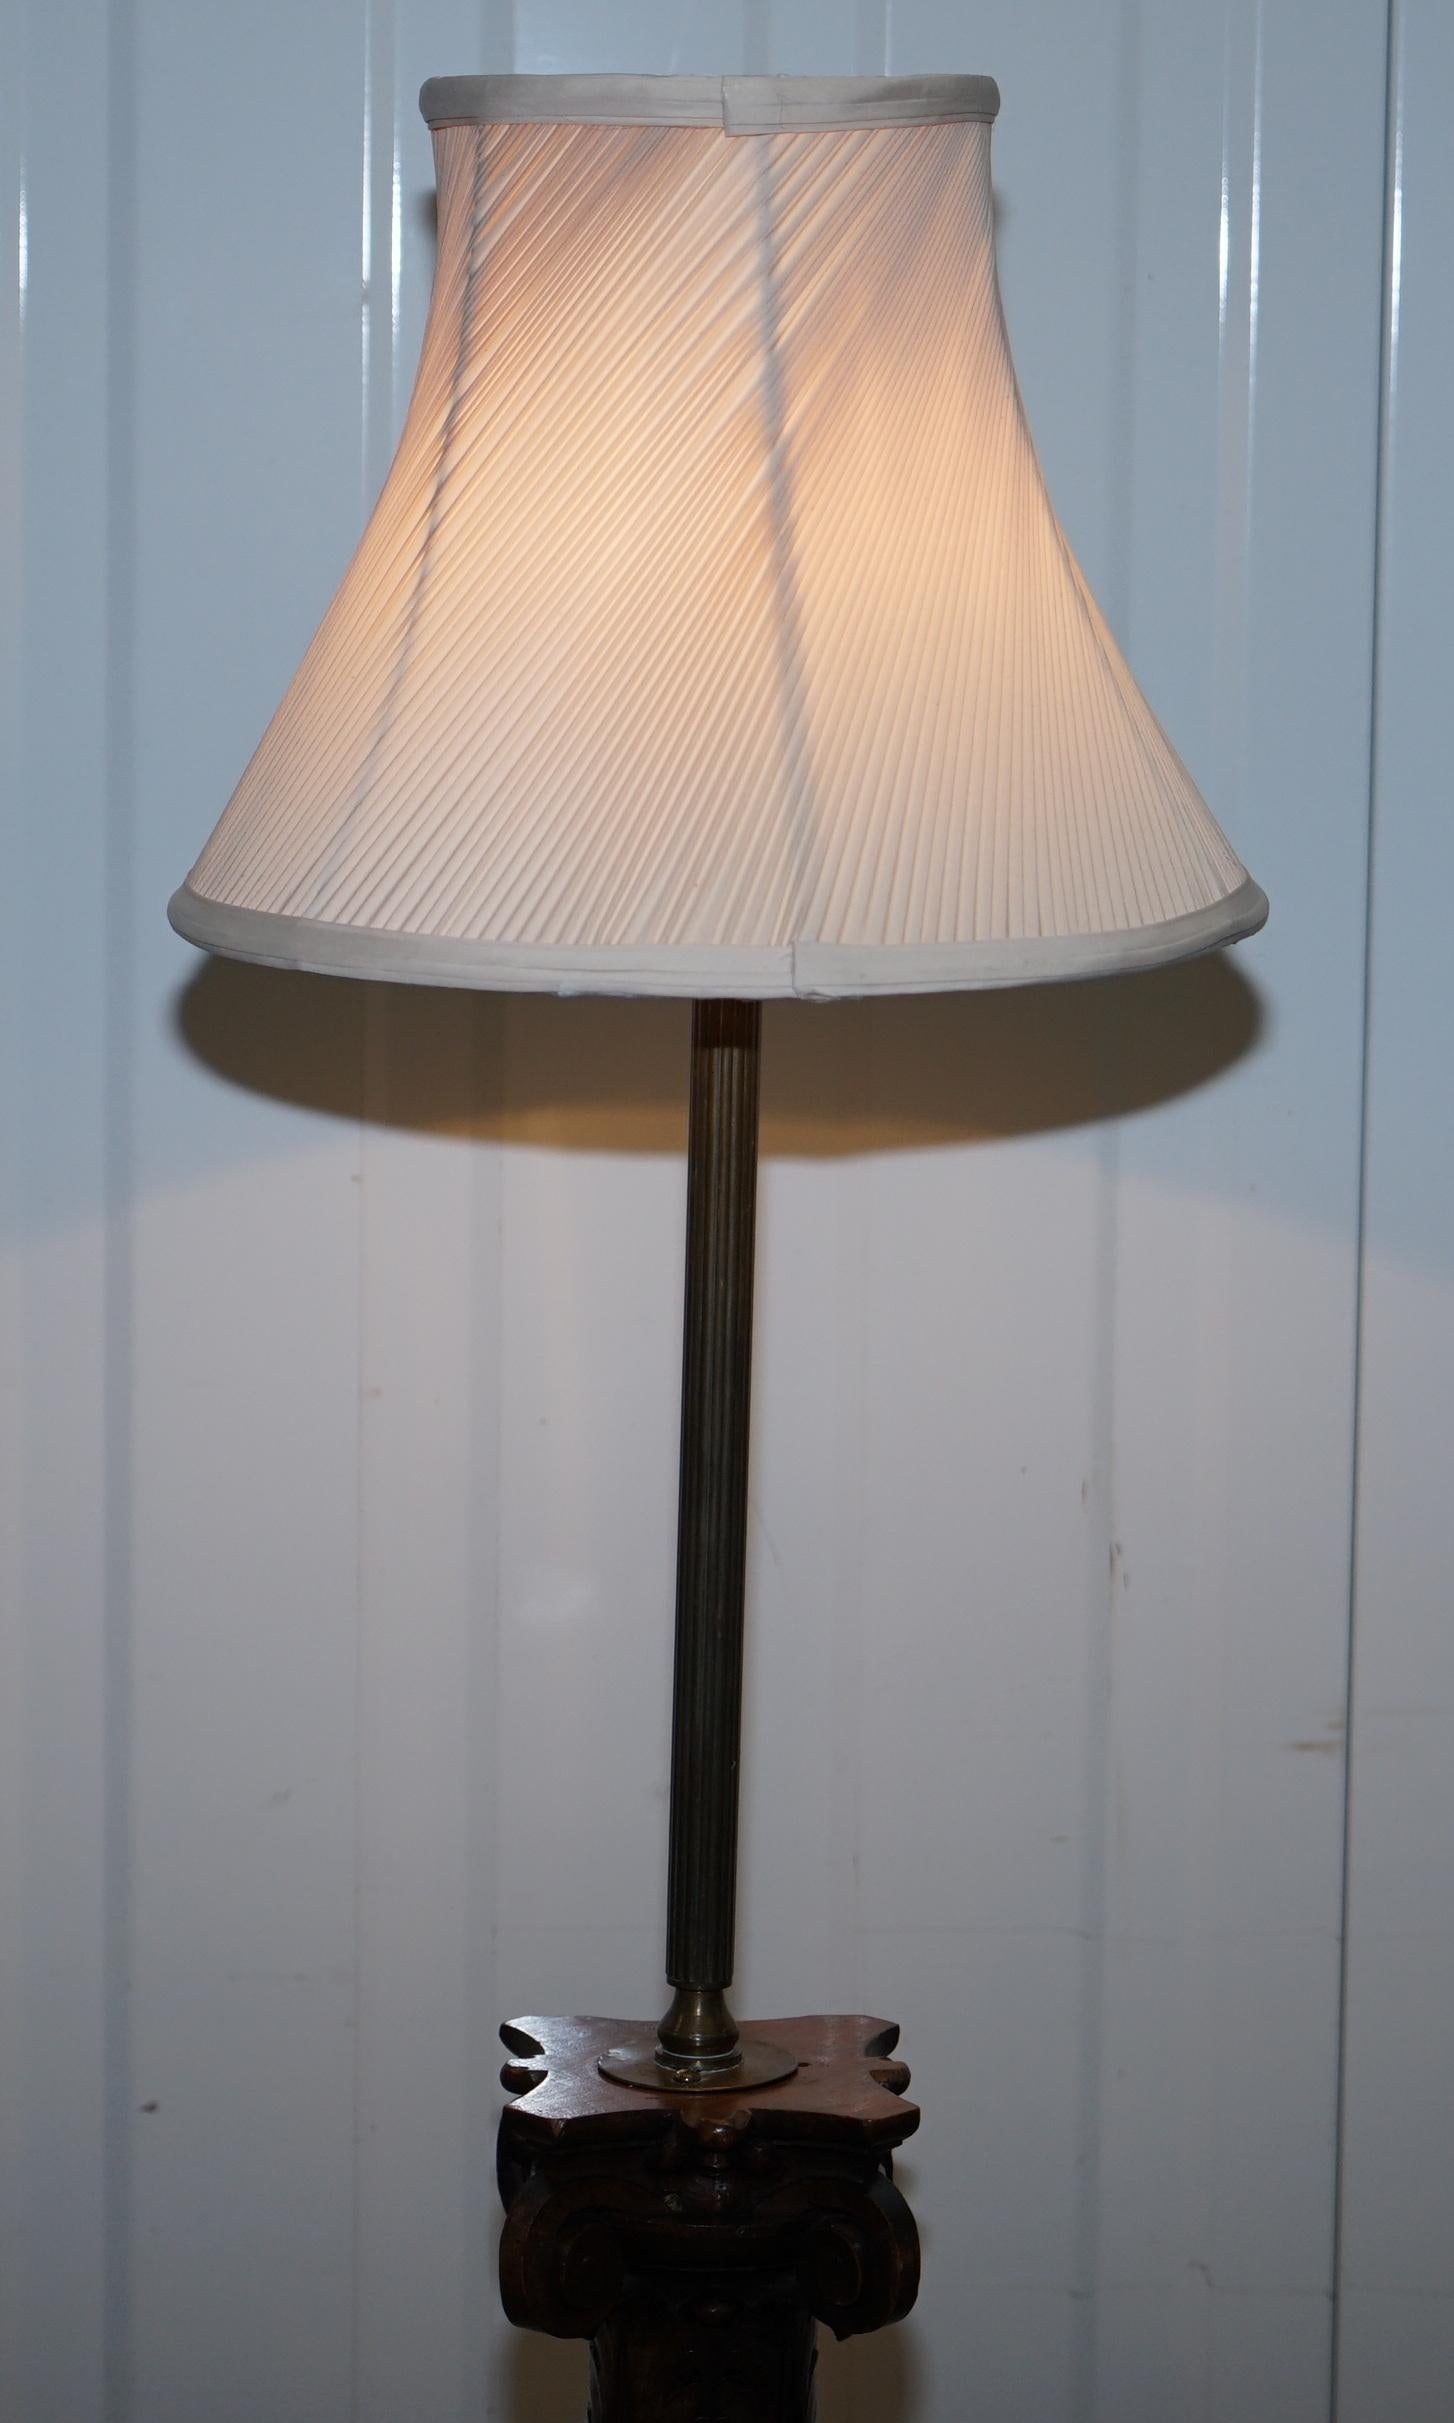 We are delighted to offer for sale this stunning handmade in England solid walnut pillared floor standing lamp.

I’m now listing for sale around 20 lamps that all came from the Duke and Duchess of Northumberland’s estate sale, each piece is